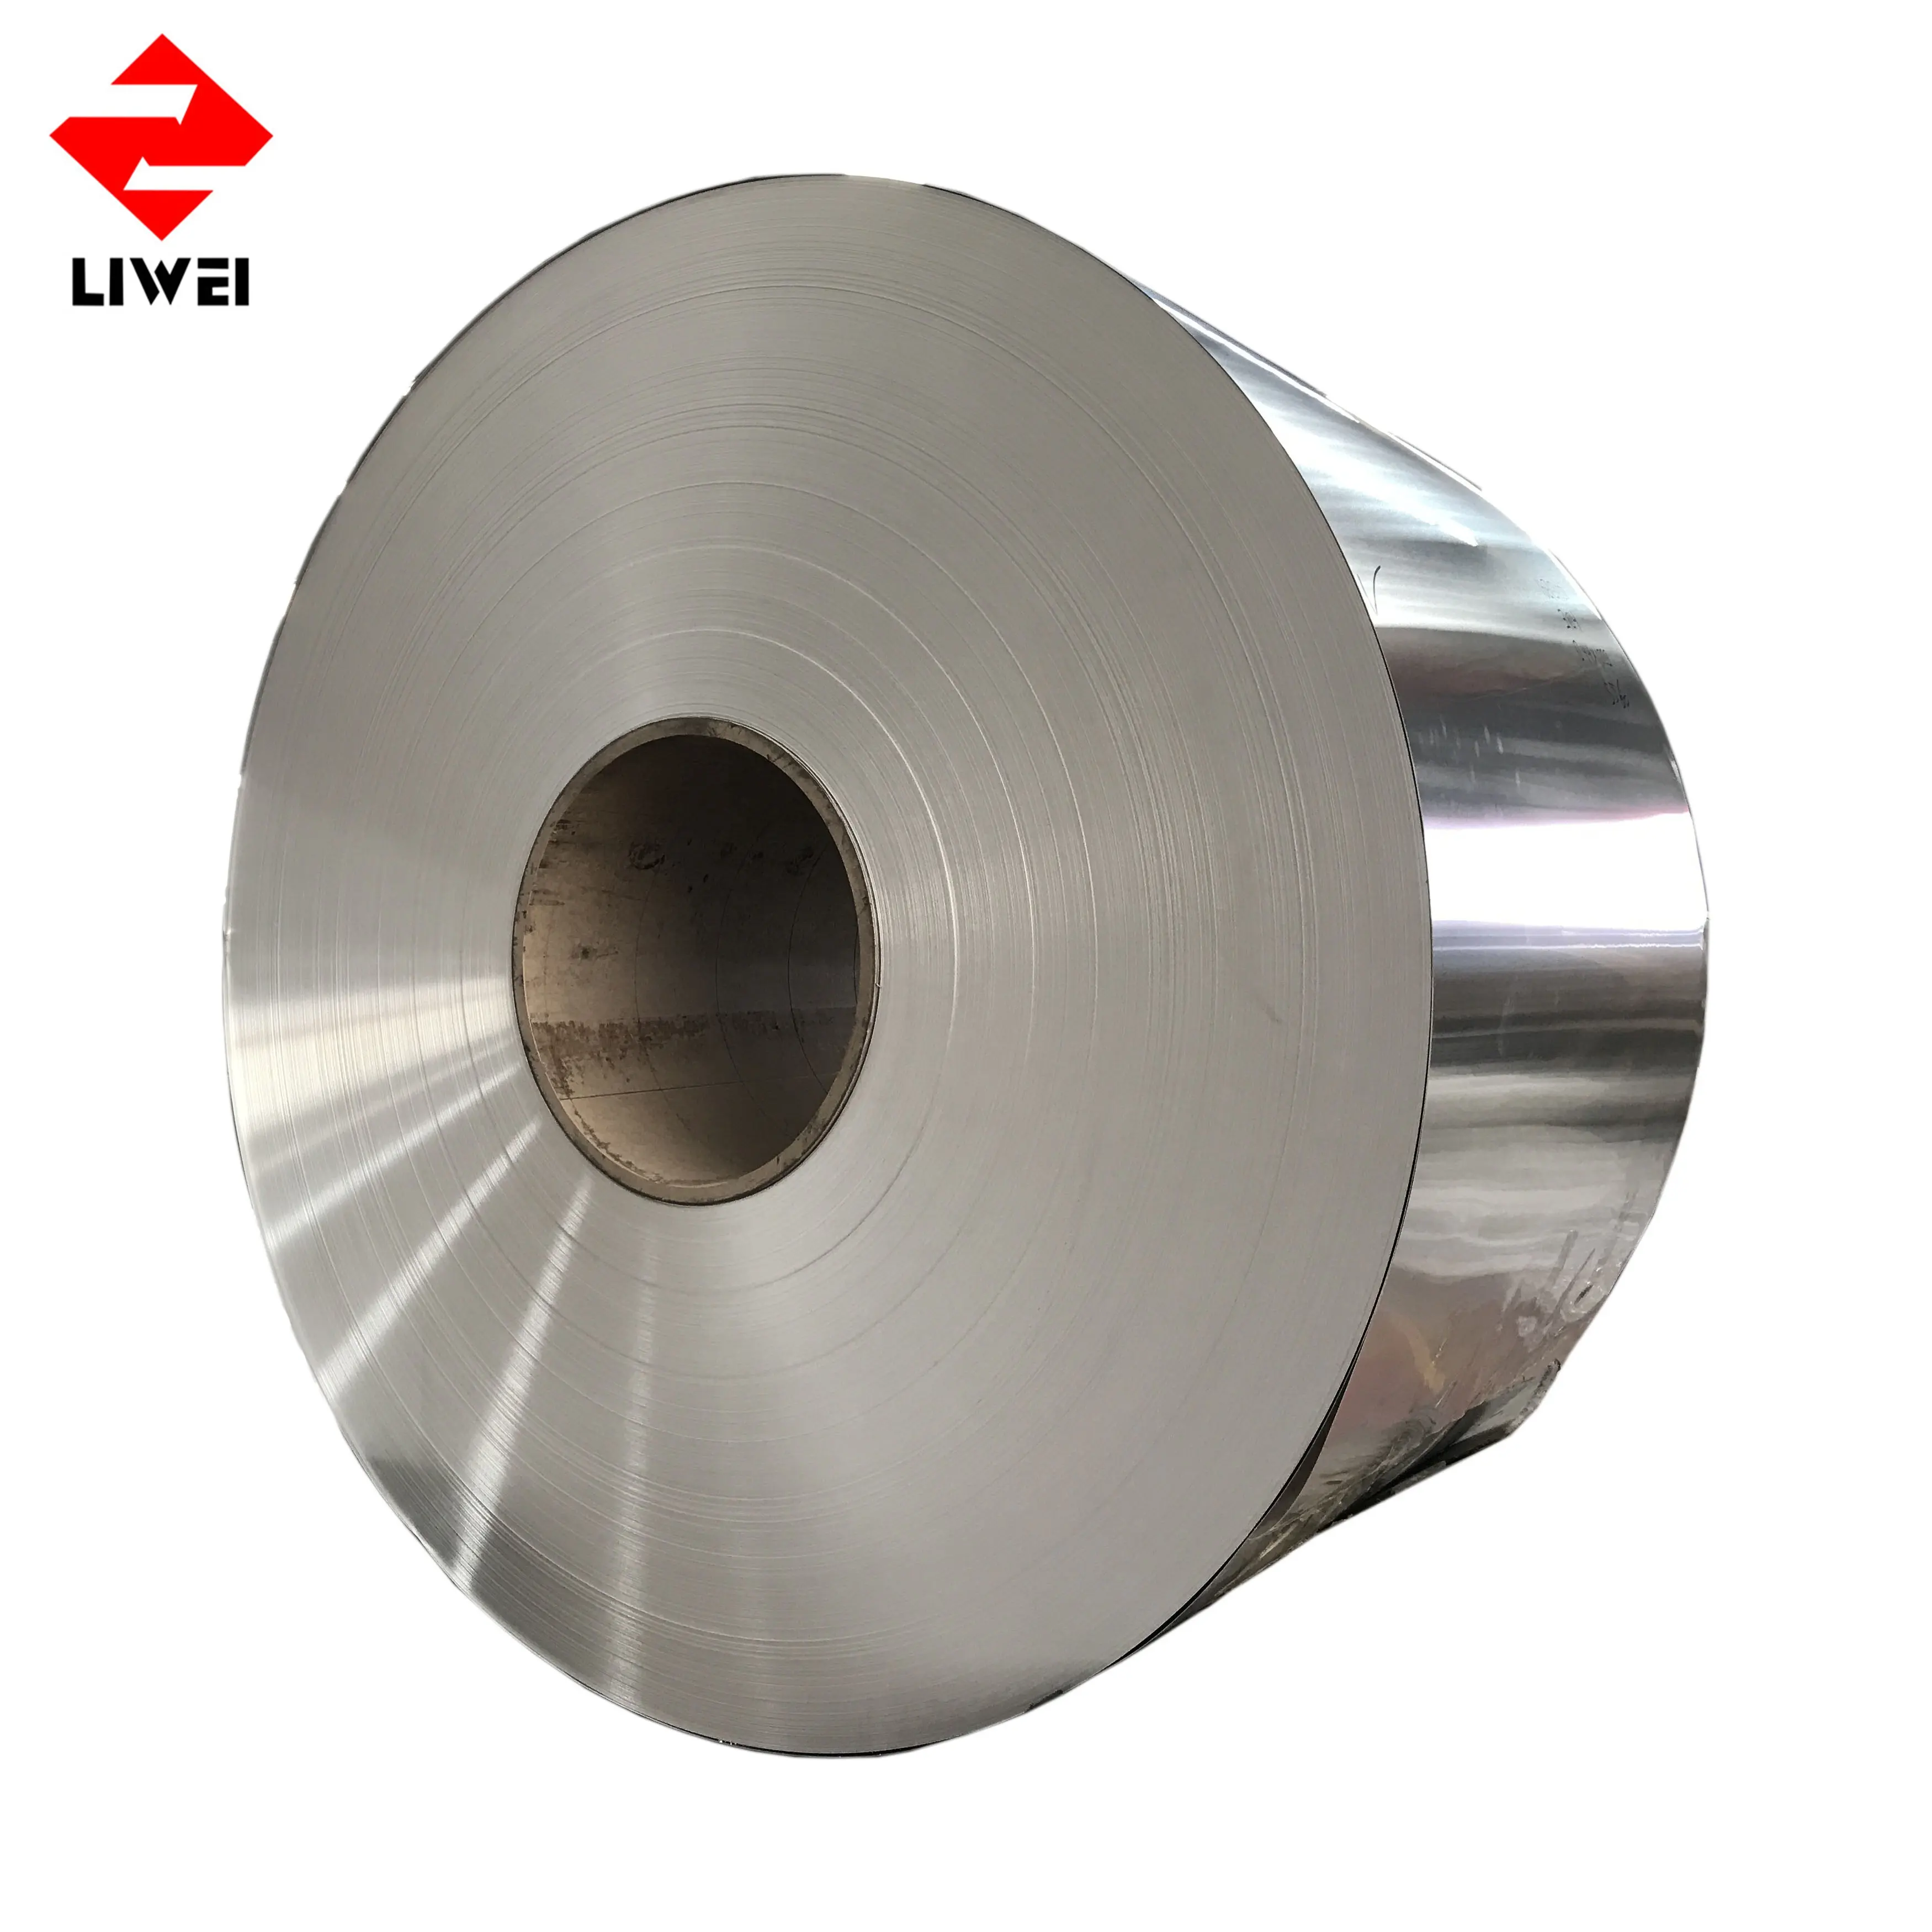 Aluminum Supplier Factory Price New Products Industrial Aluminum